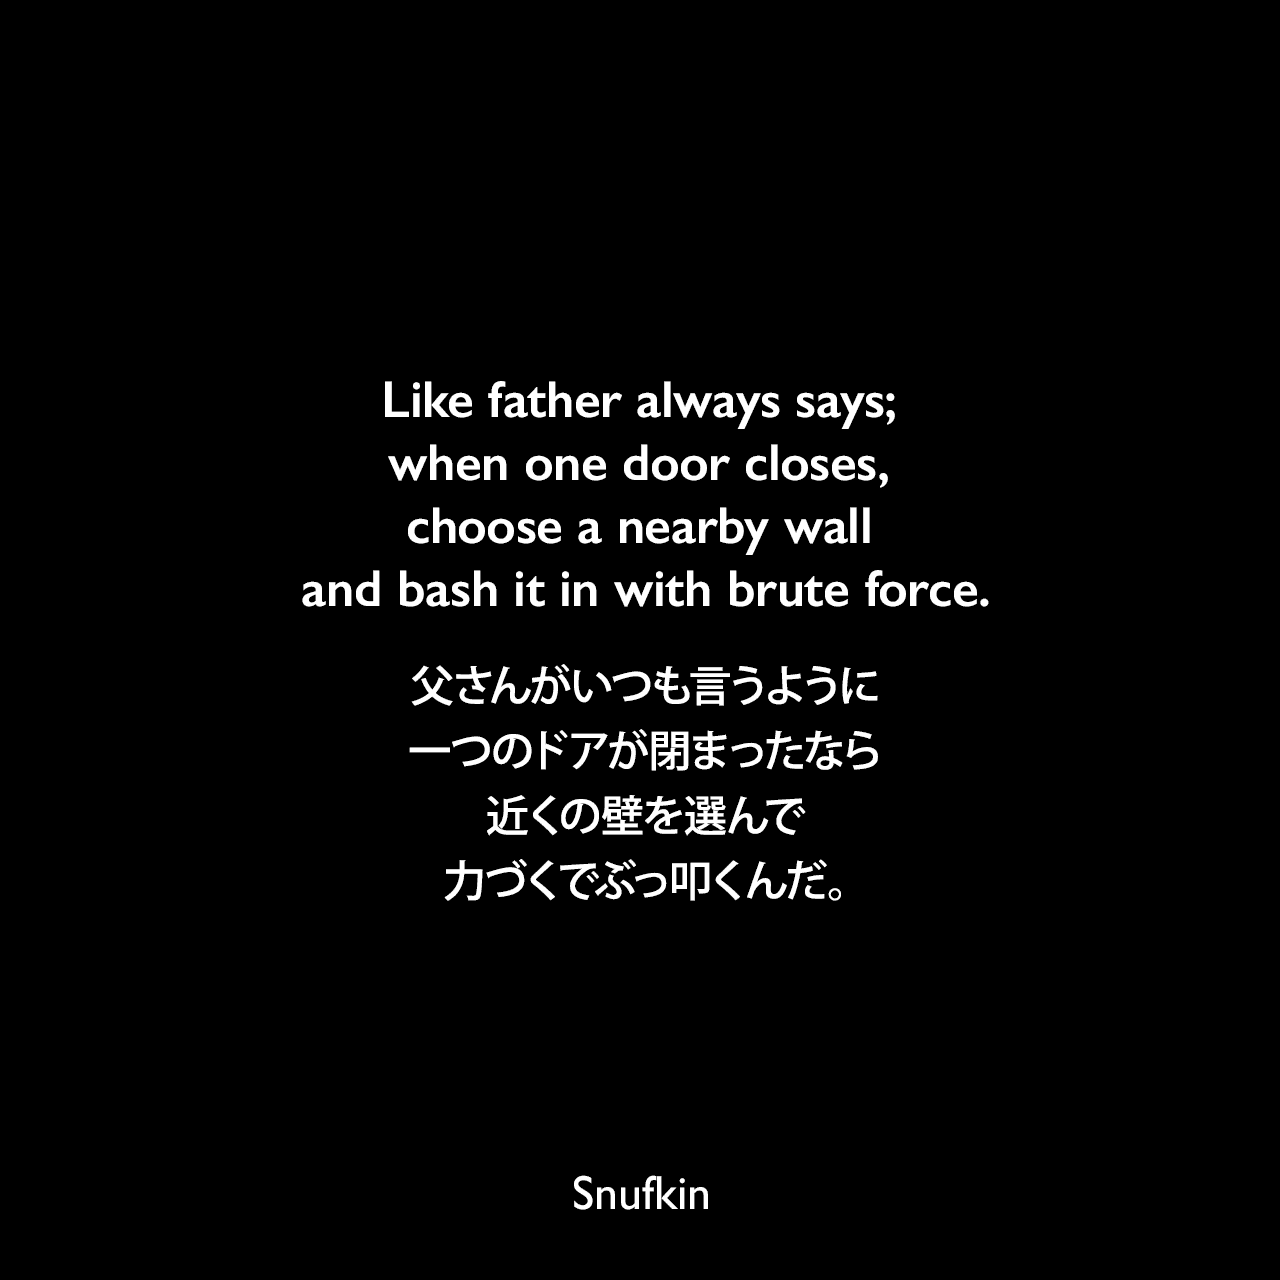 Like father always says; when one door closes, choose a nearby wall and bash it in with brute force.父さんがいつも言うように、一つのドアが閉まったなら近くの壁を選んで力づくでぶっ叩くんだ。